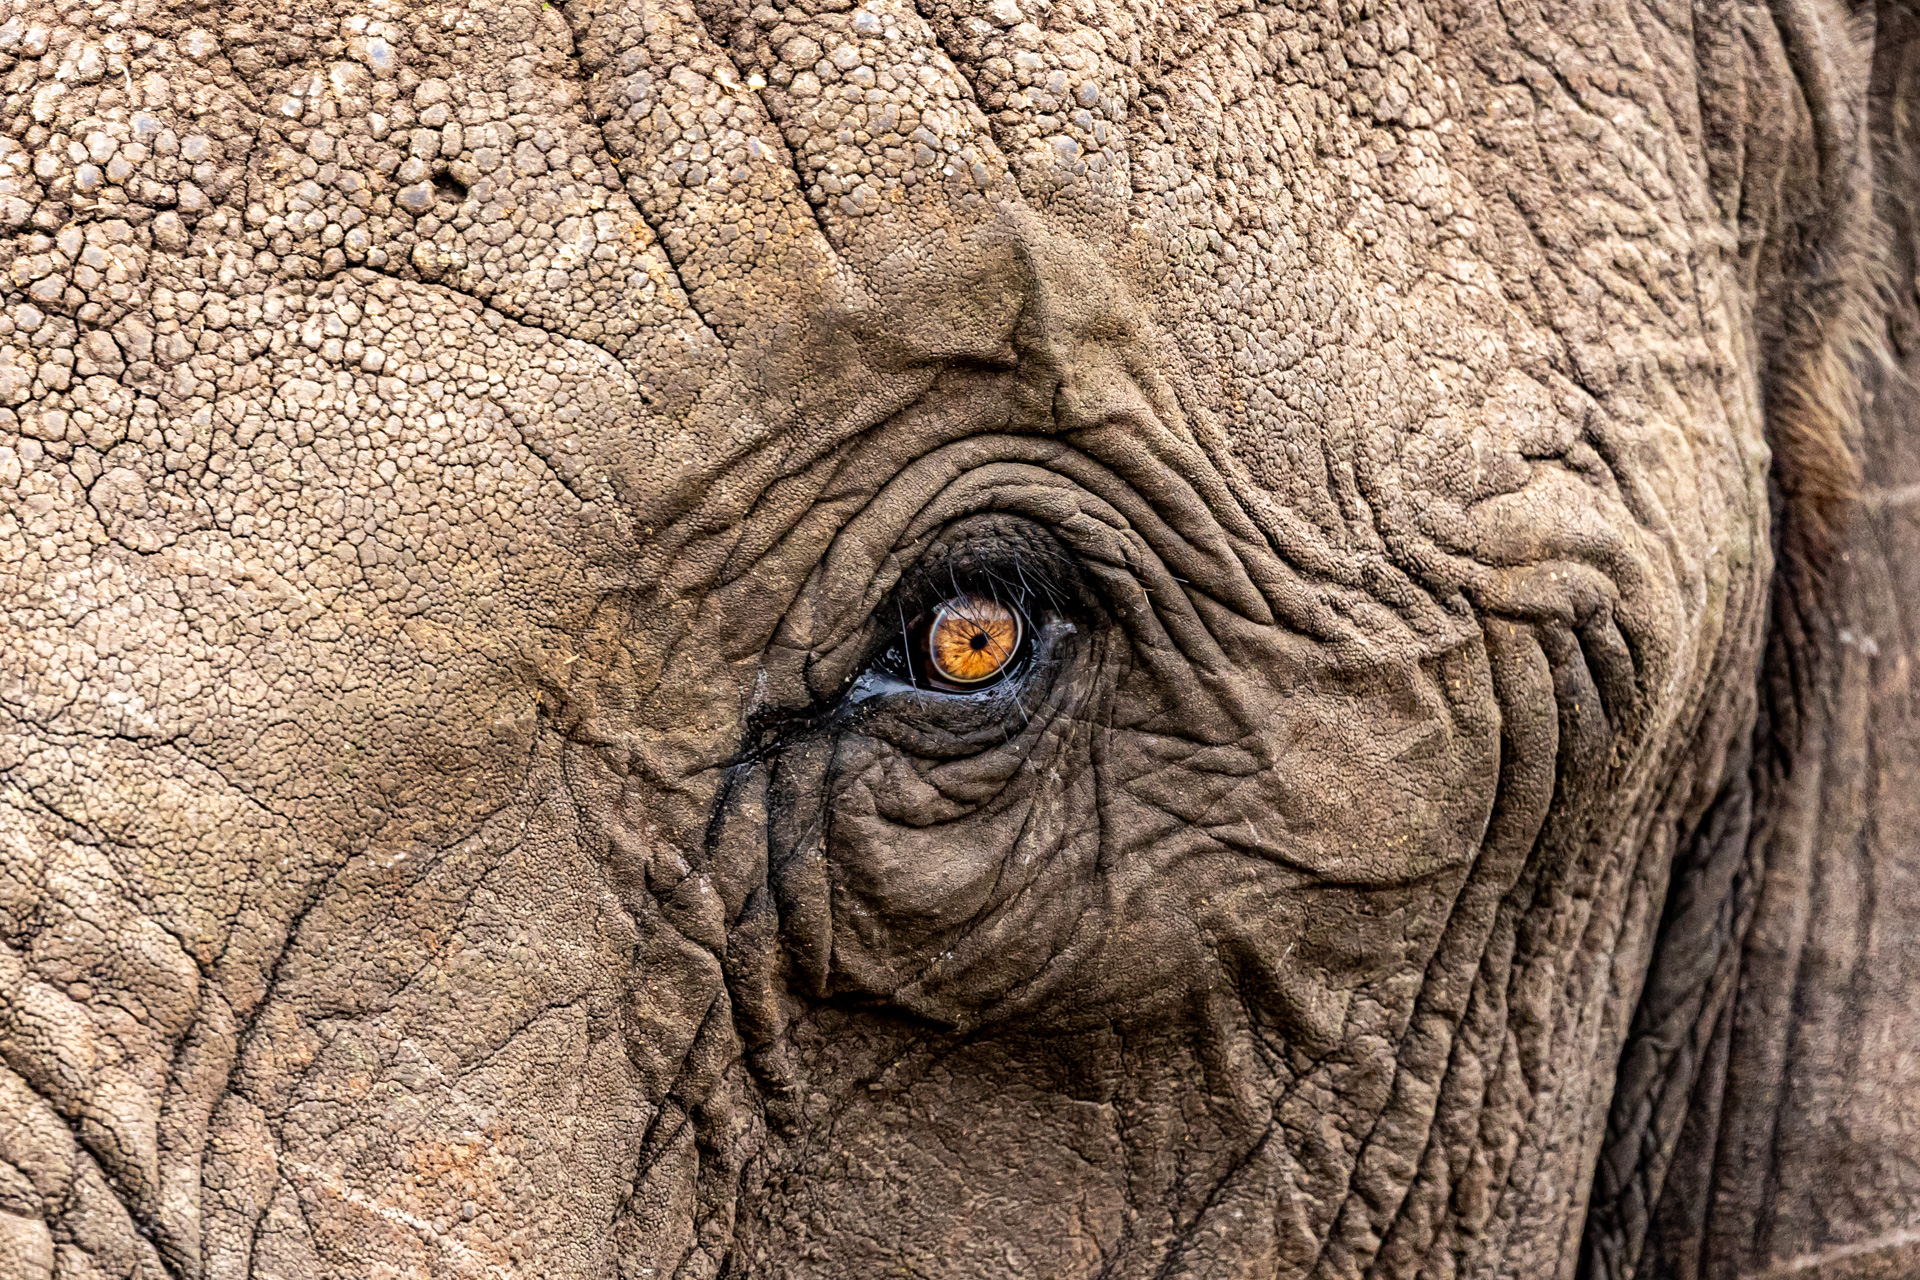 Above: The wise eye of an aged elephant